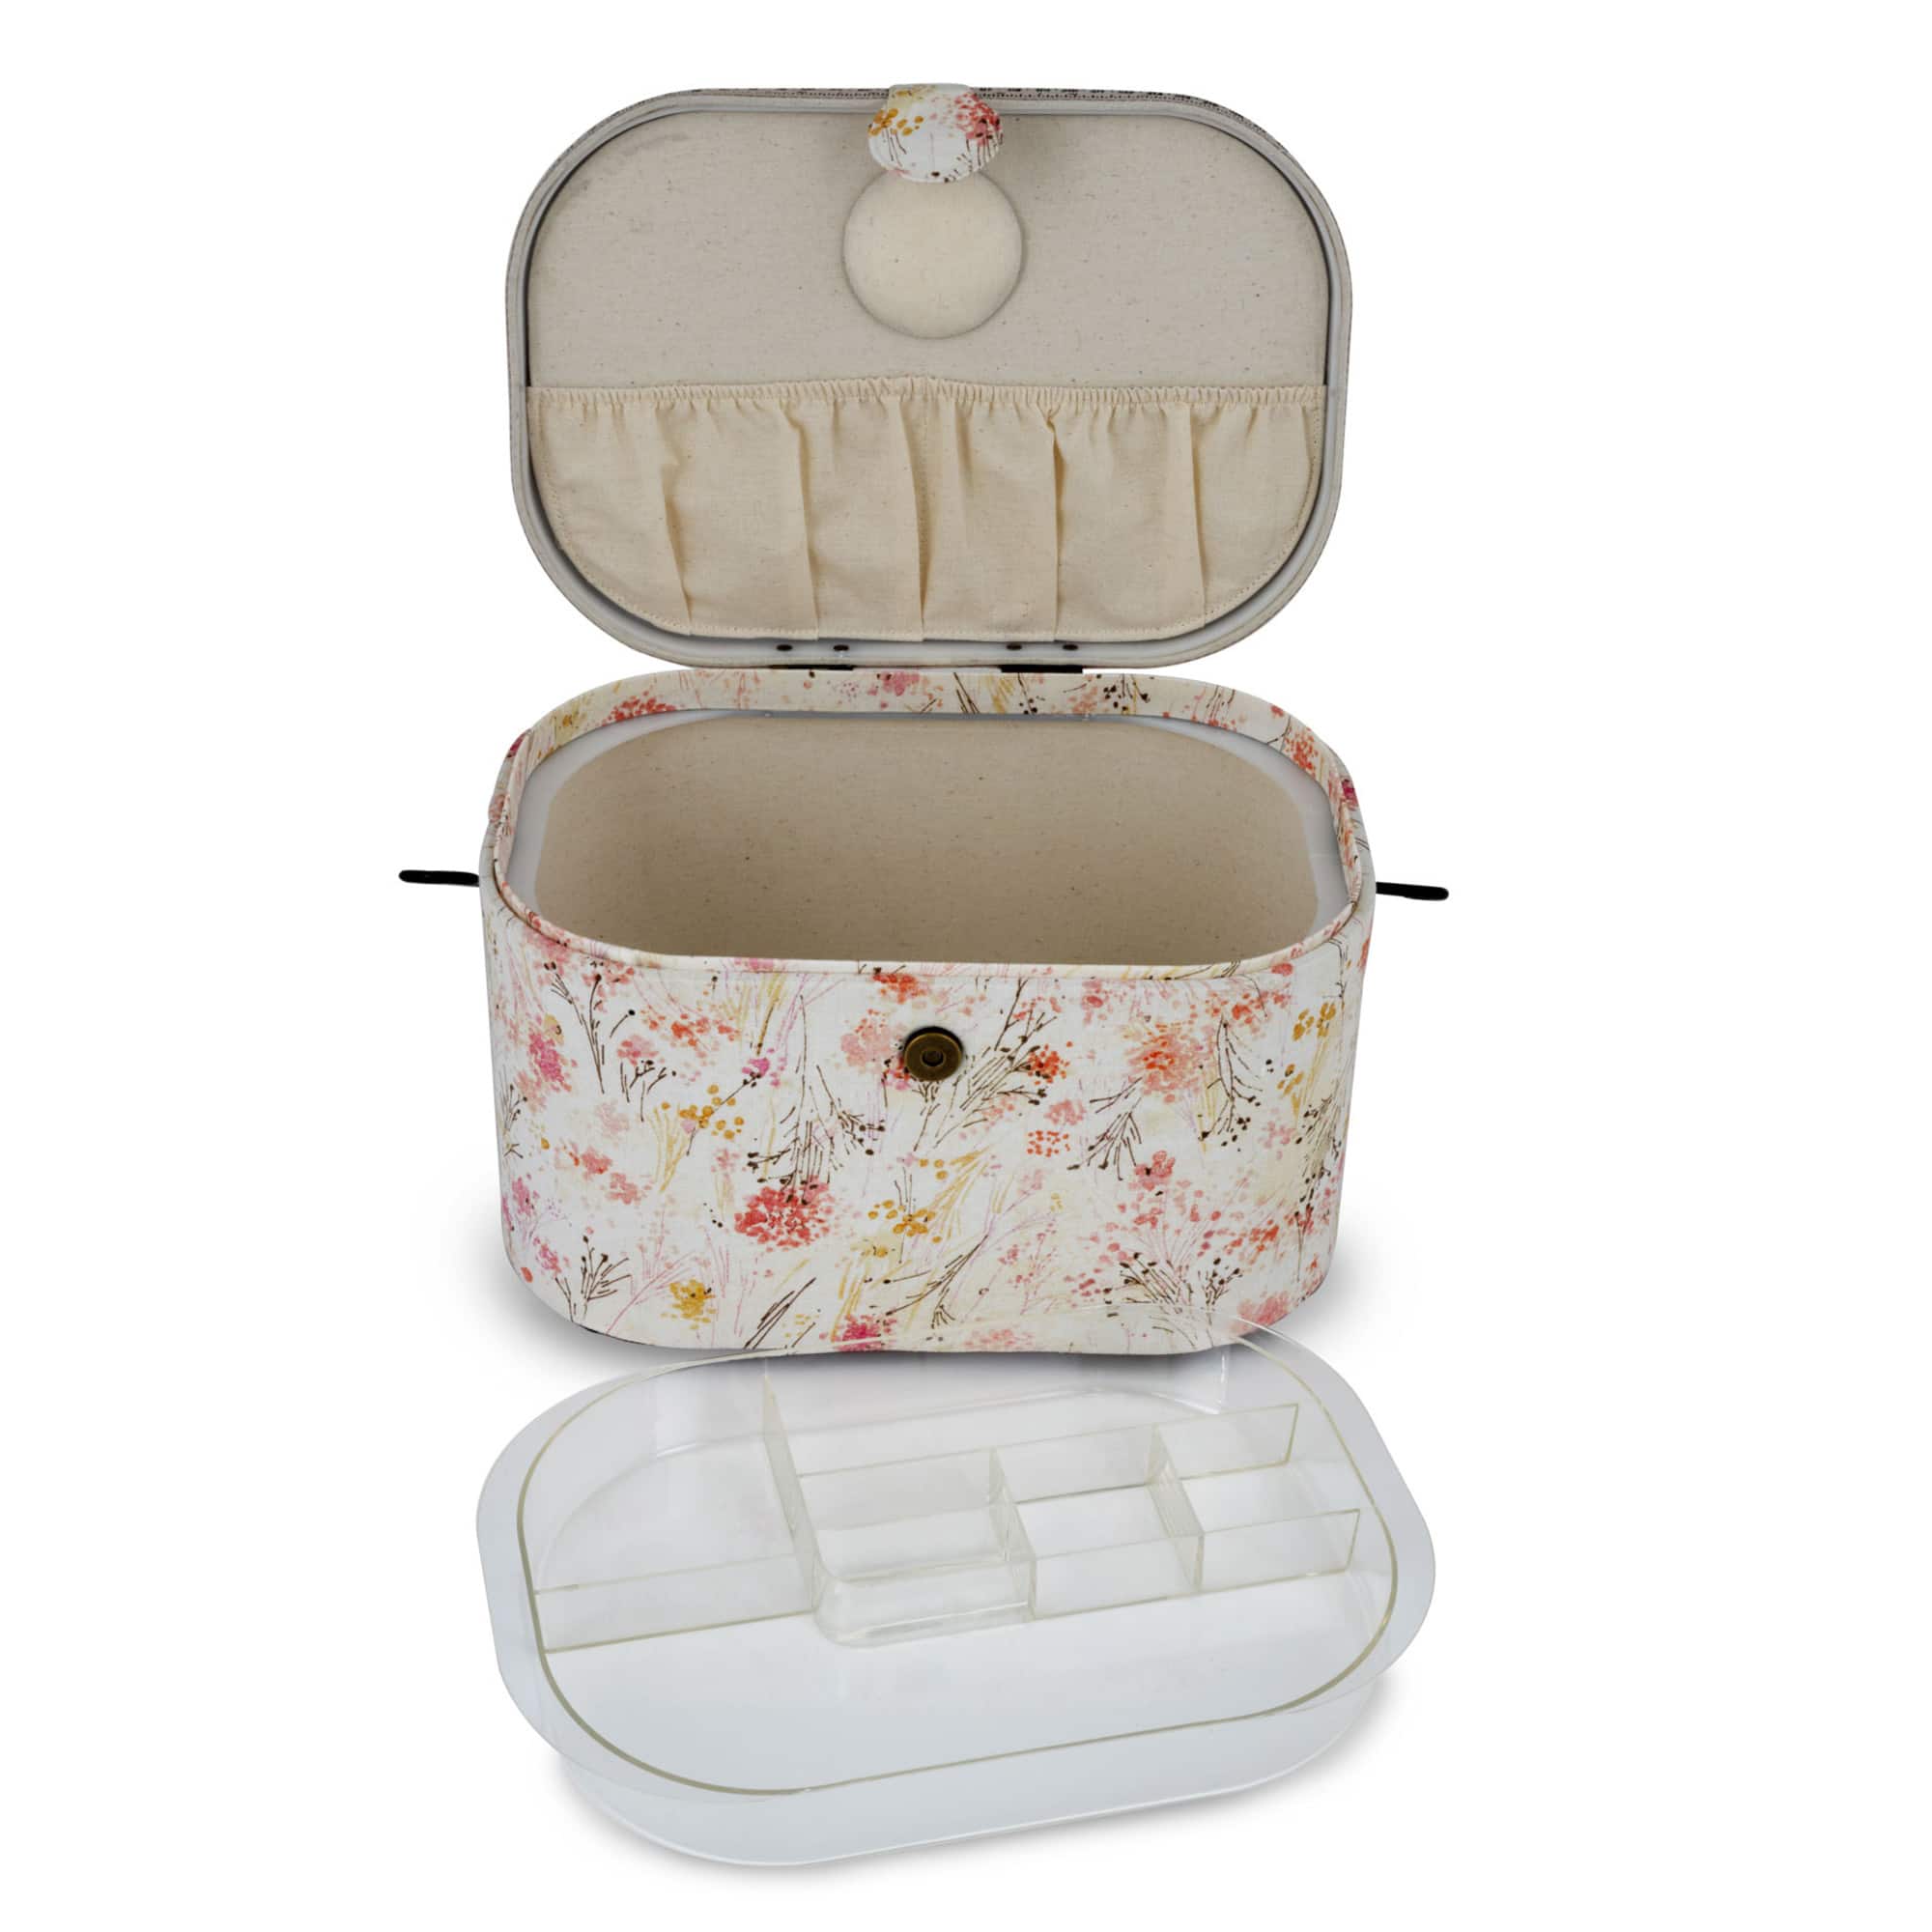 Dritz Sewing Baskets in Sewing Storage 